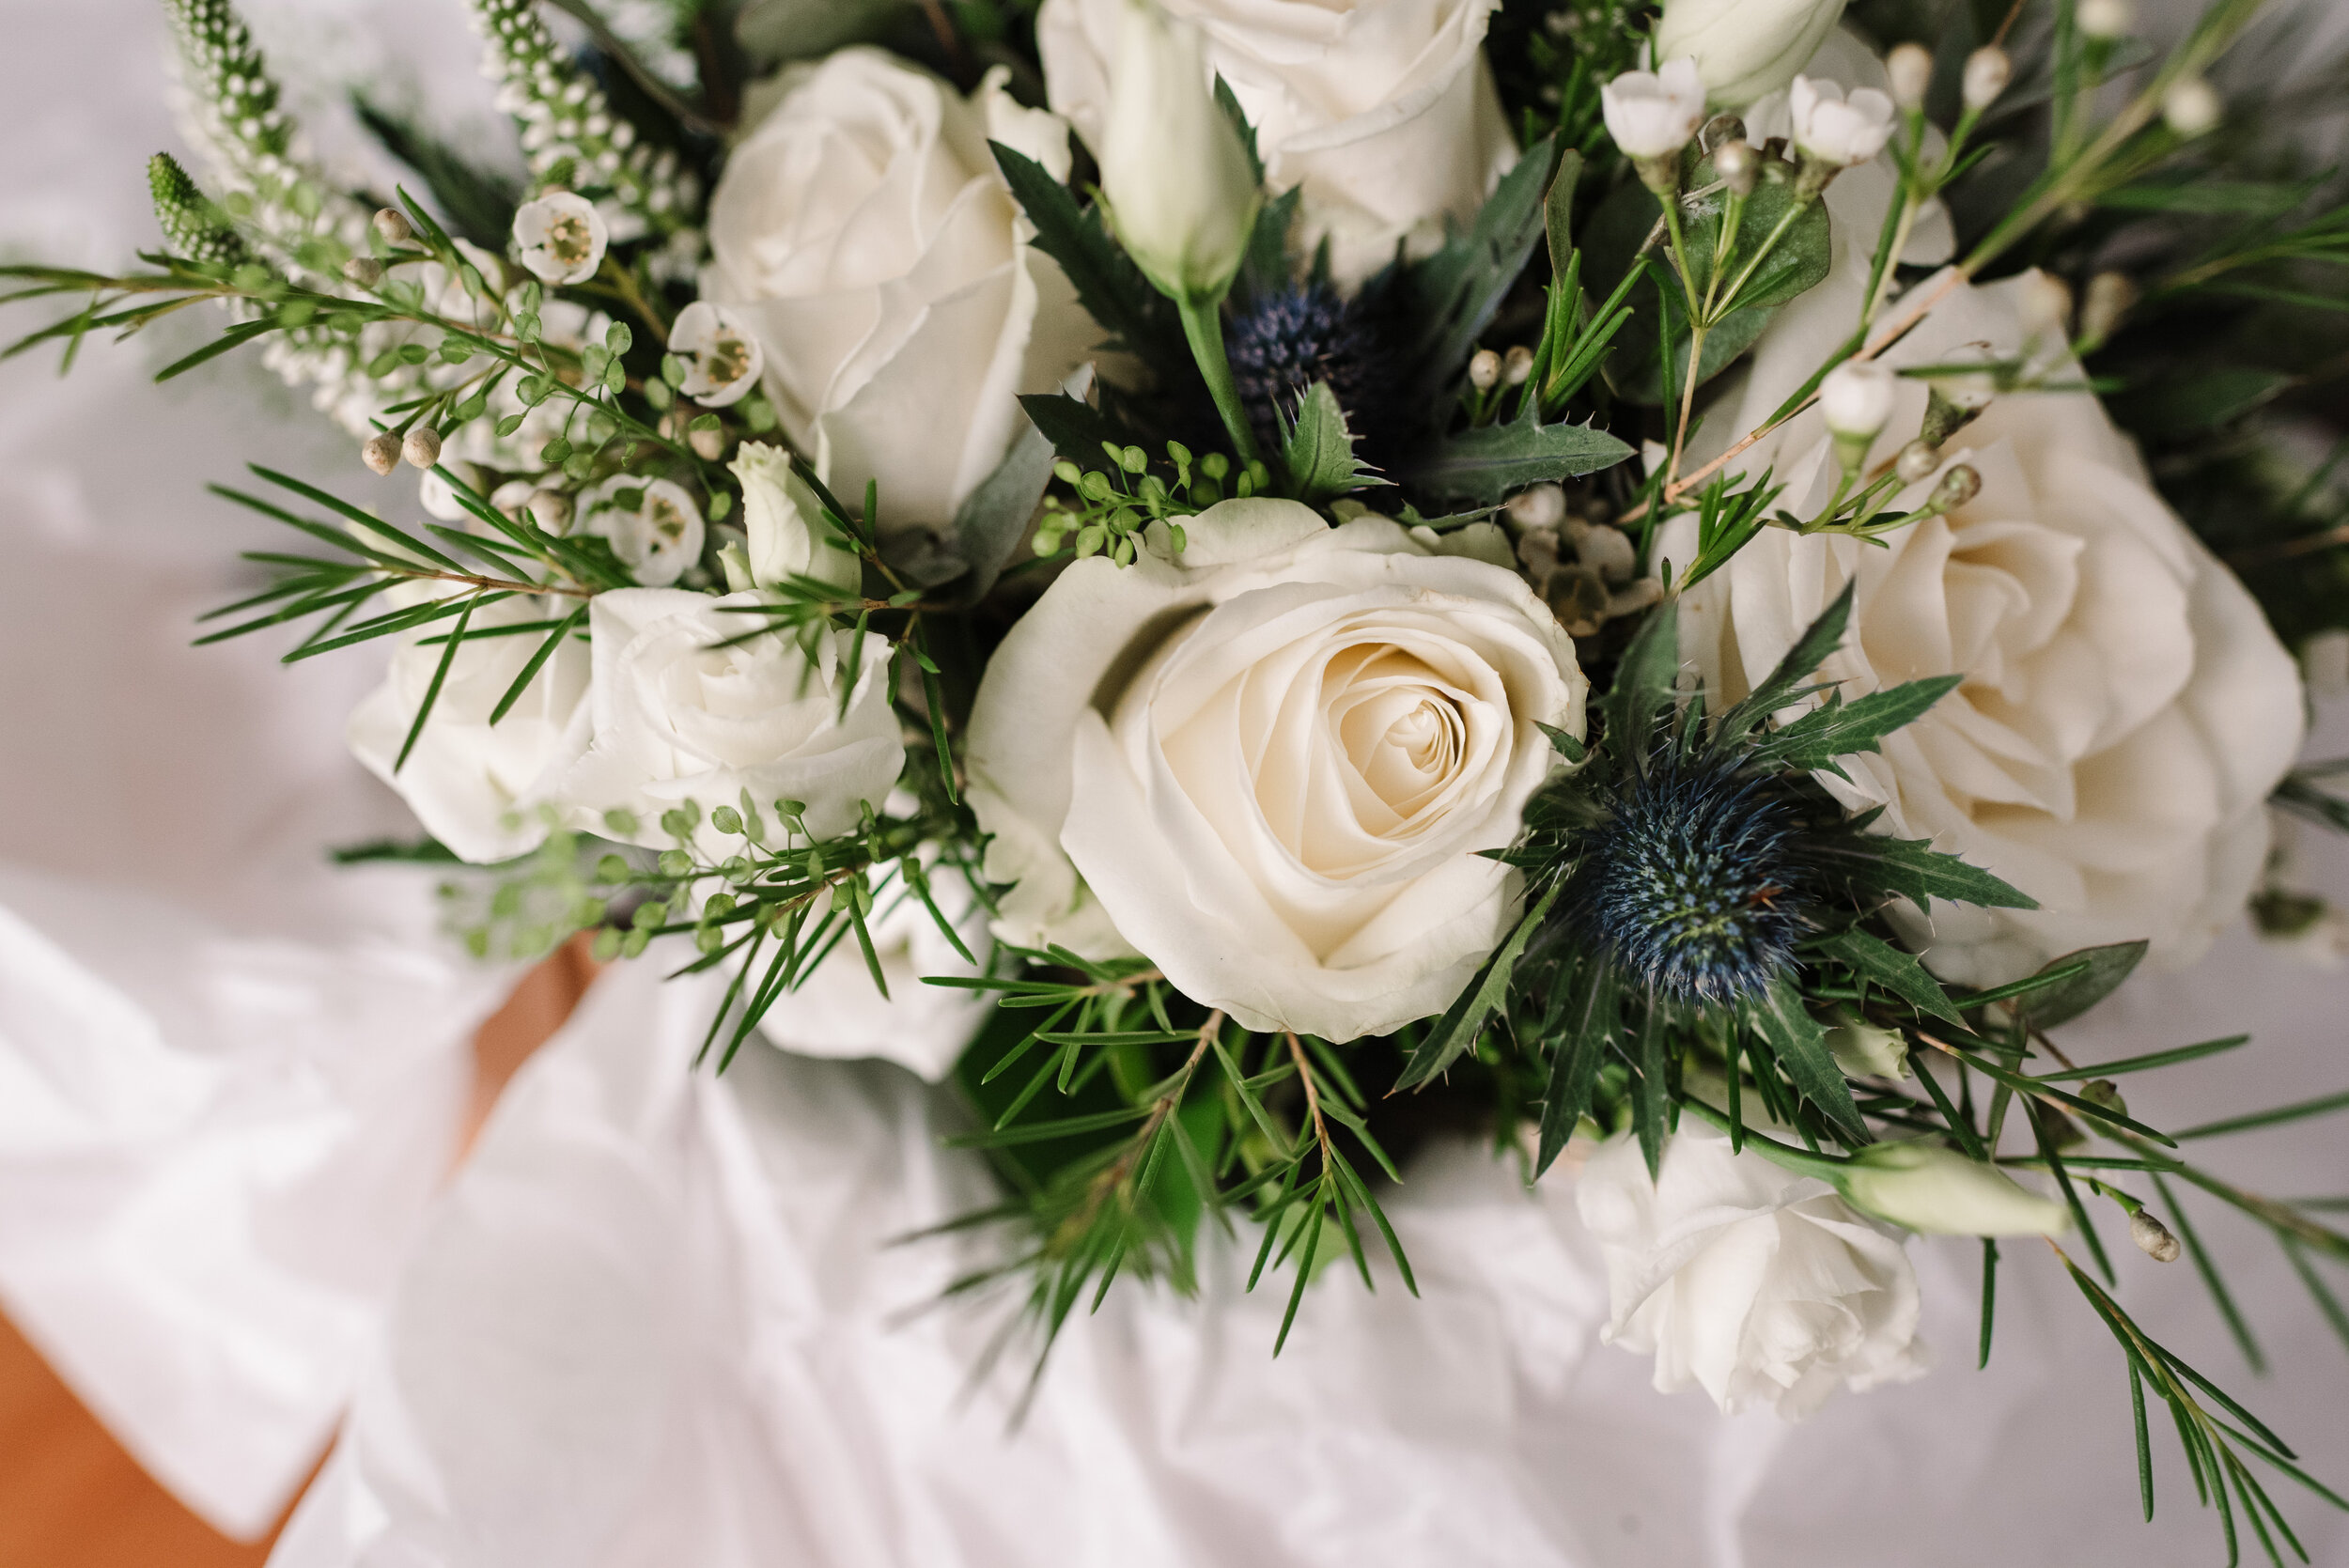 Bride's bouquet with white roses and thistles